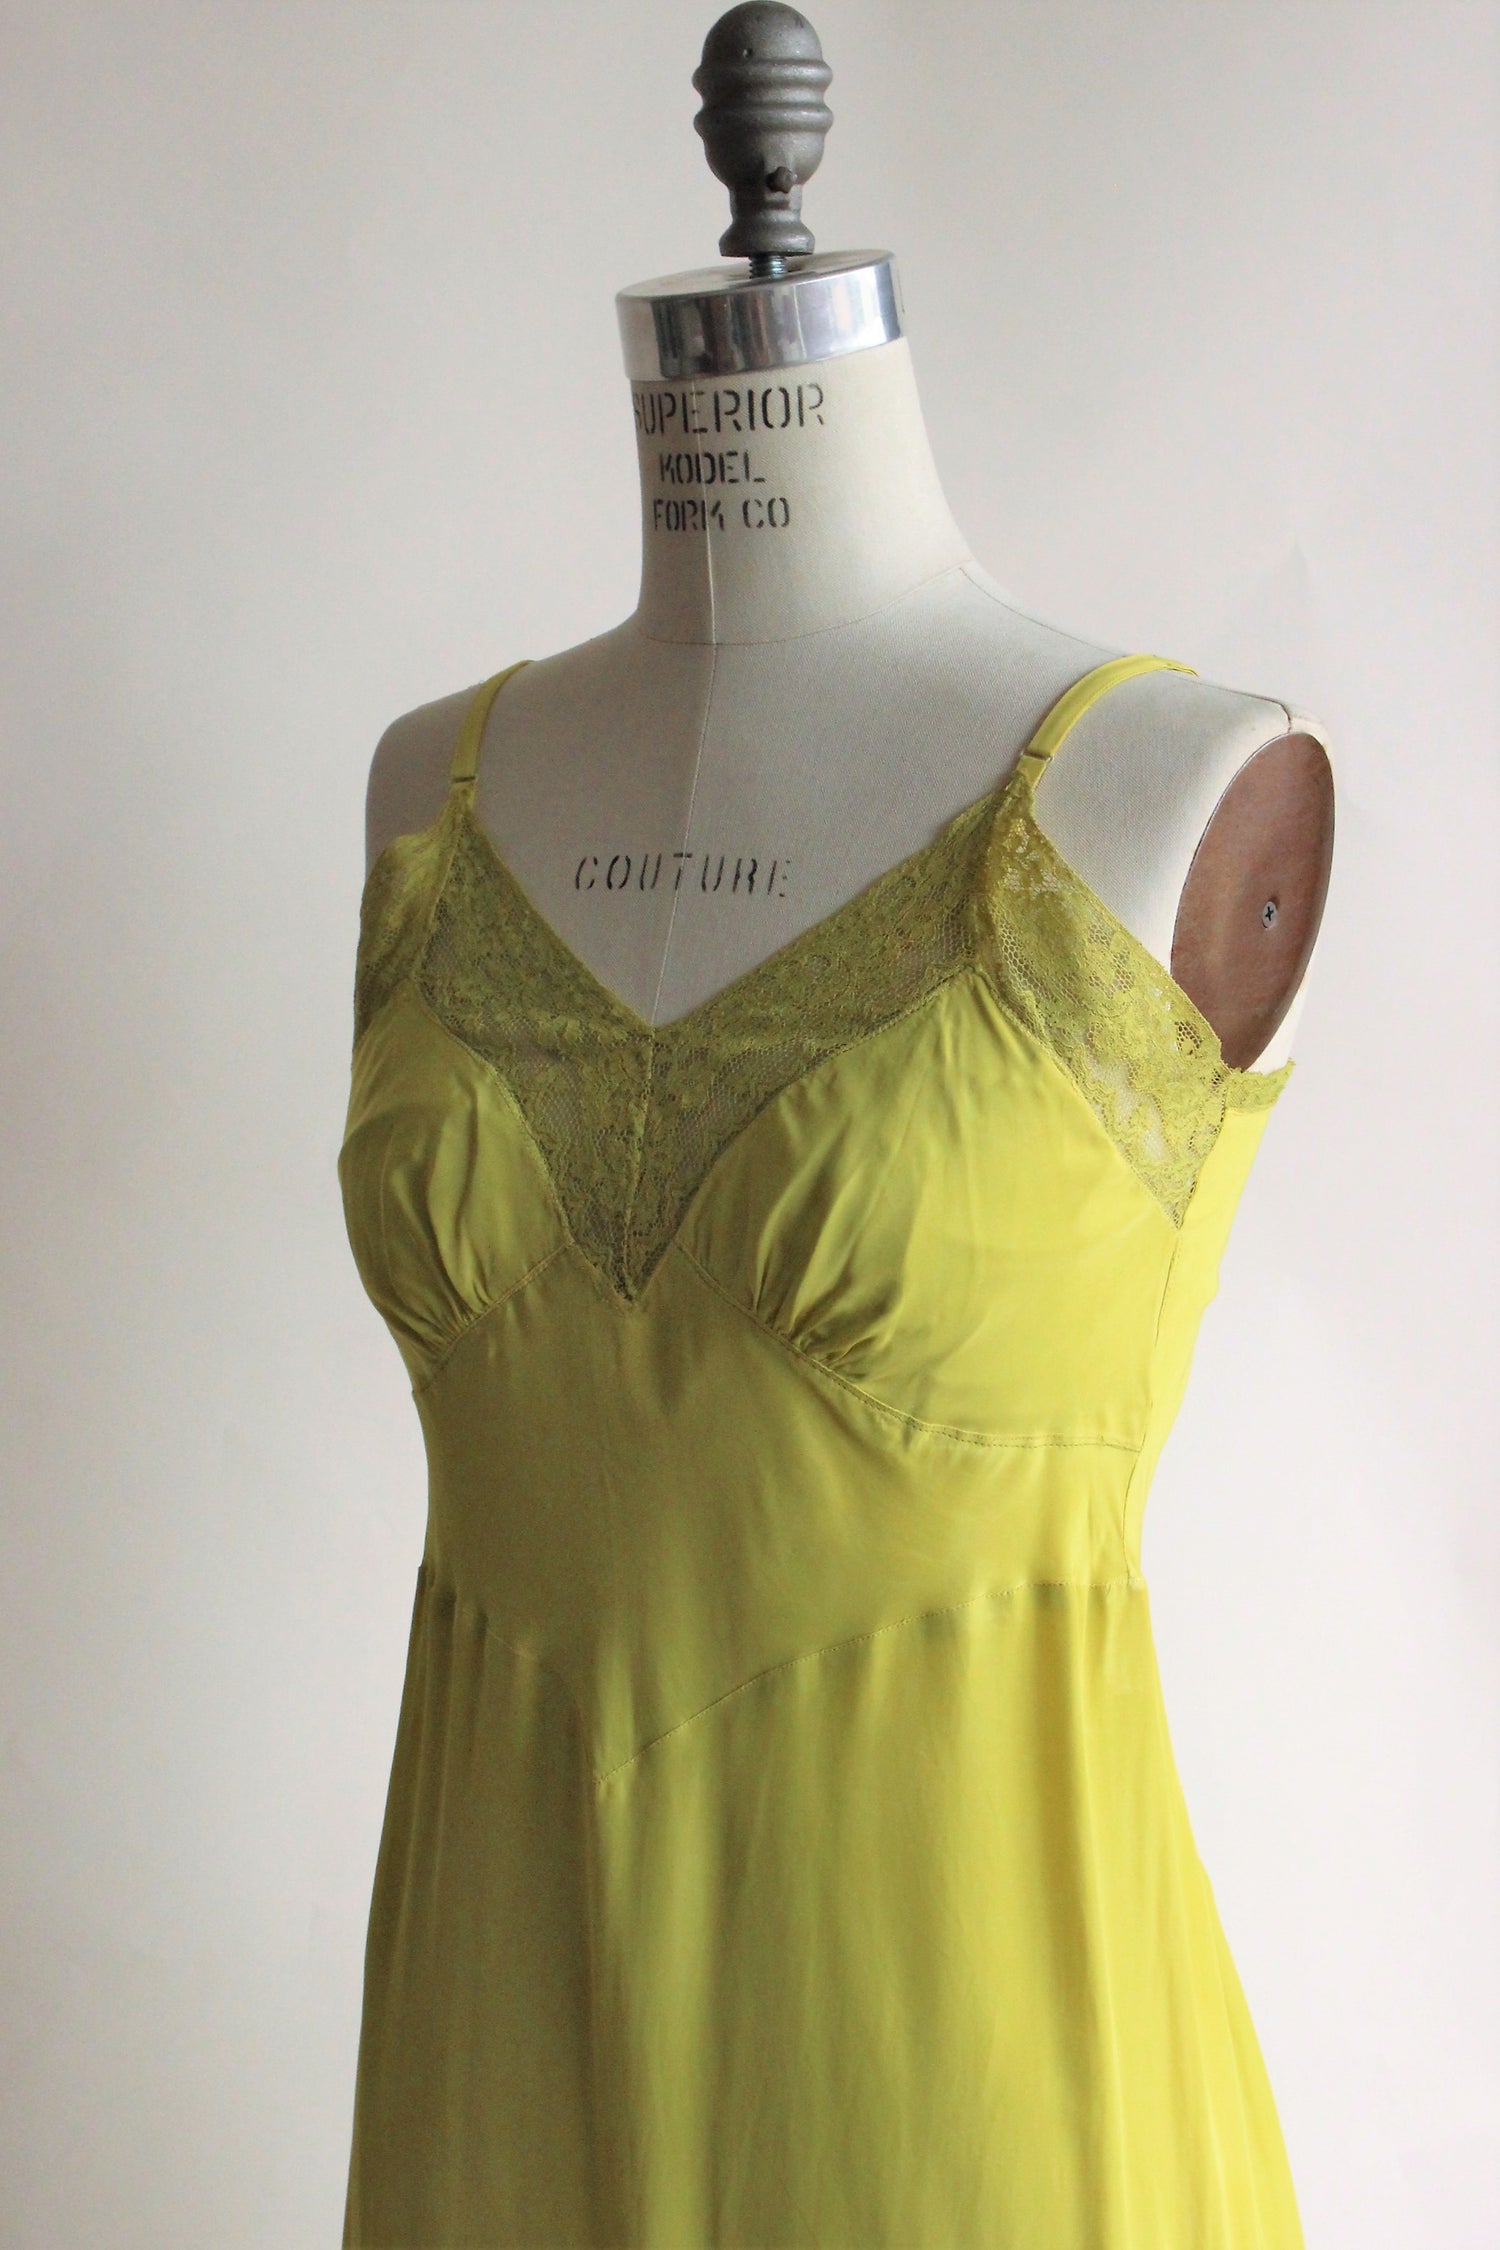 Vintage 1950s Chartreuse Green Rayon Full Slp